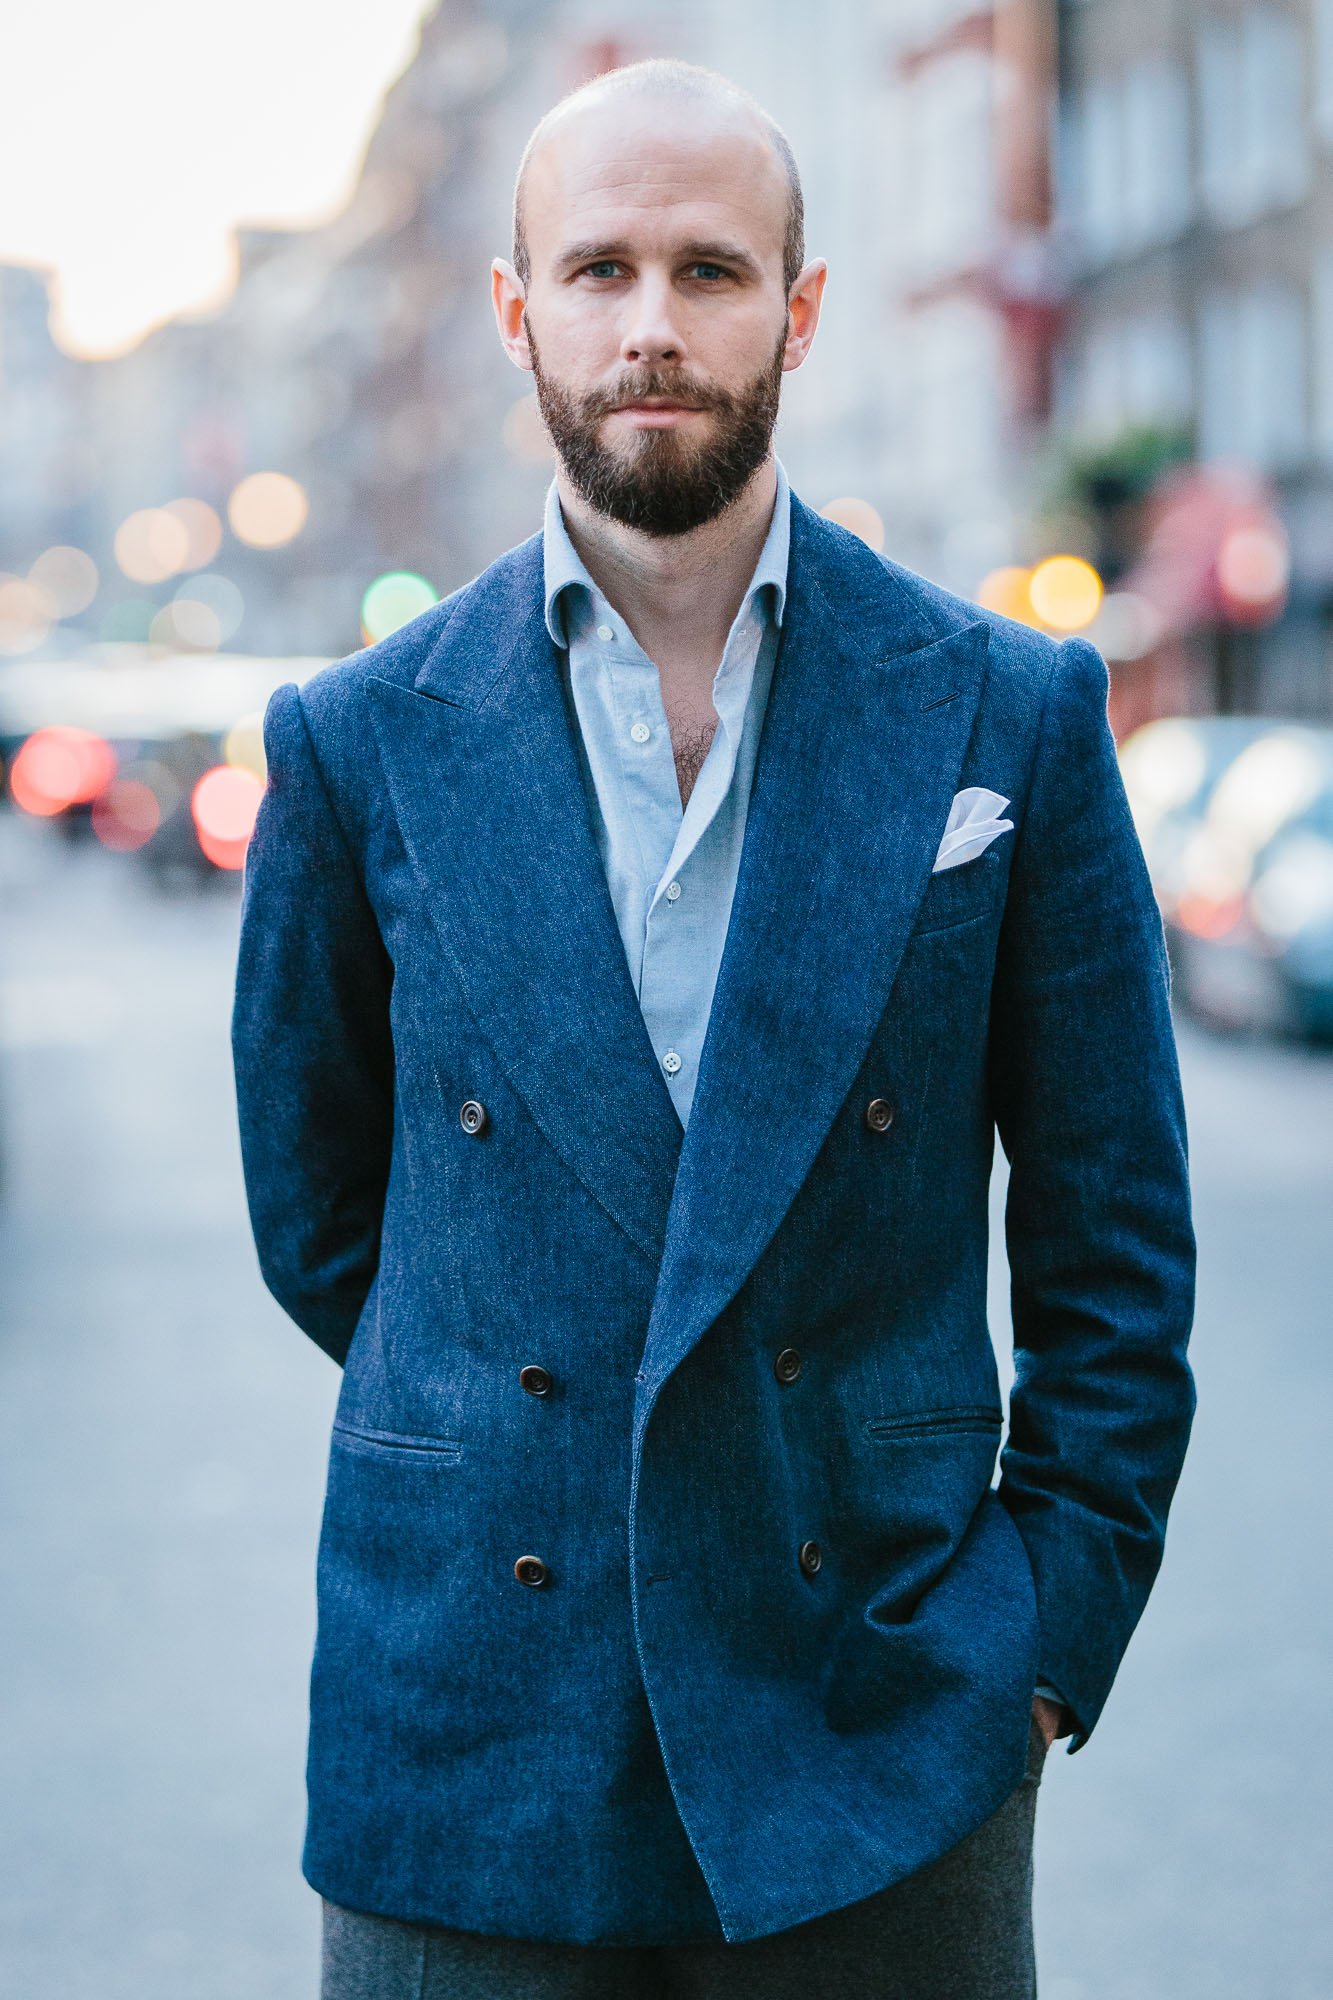 Bespoke double-breasted denim jacket – from Cifonelli, Paris